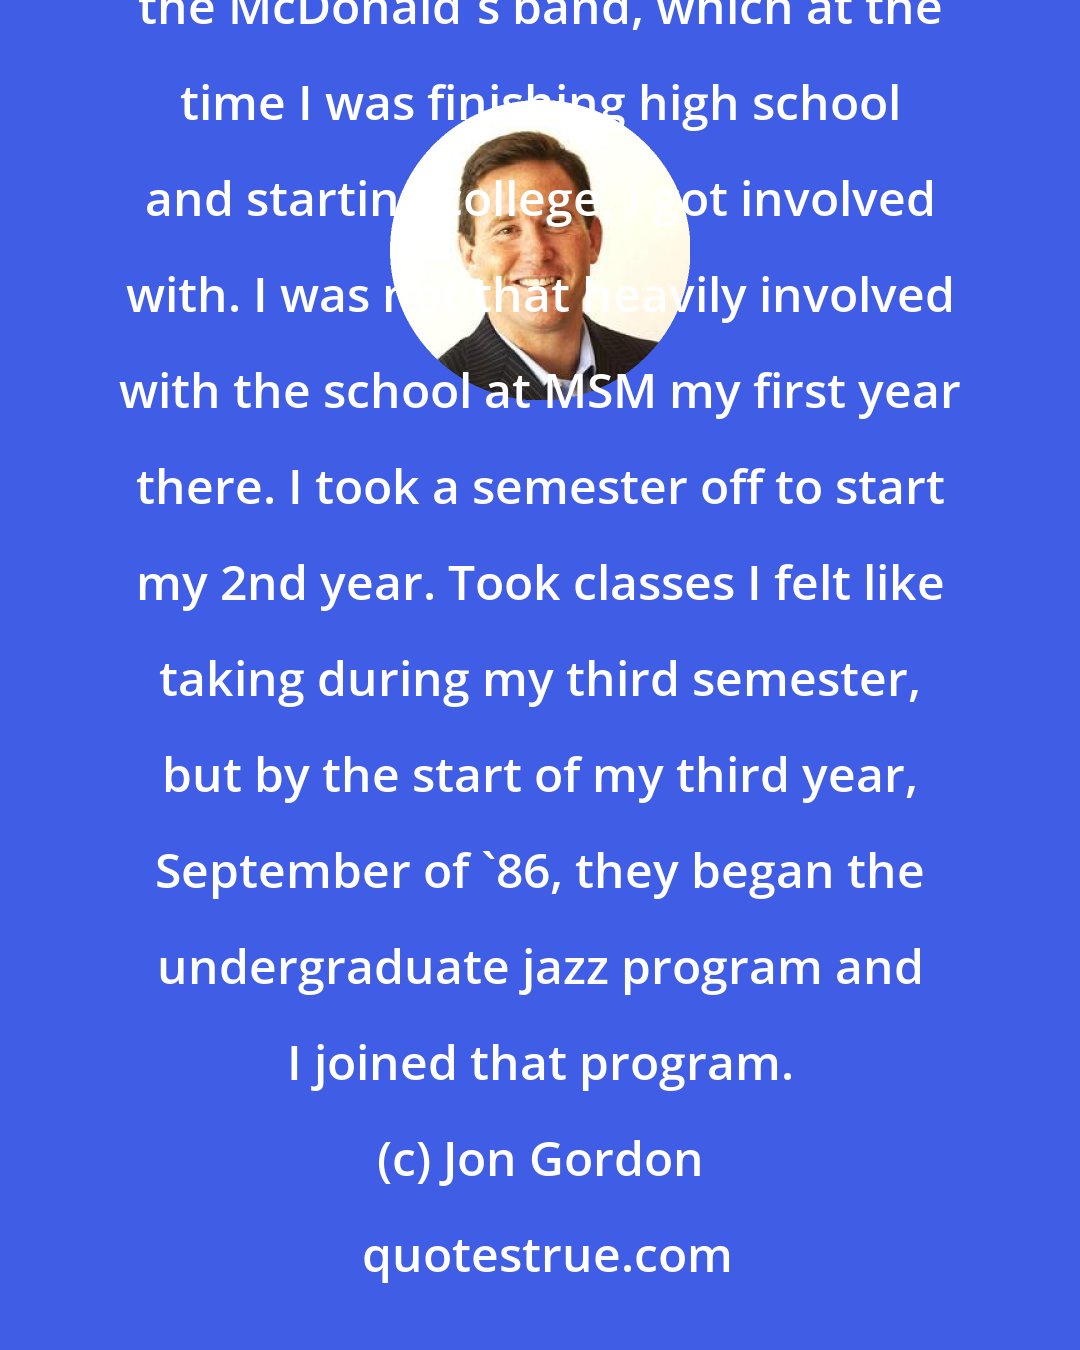 Jon Gordon: Justin [Di Cioccio] was [at Laguardia School of Arts]. He later took over at Manhattan. But I knew Justin through the McDonald's band, which at the time I was finishing high school and starting college, I got involved with. I was not that heavily involved with the school at MSM my first year there. I took a semester off to start my 2nd year. Took classes I felt like taking during my third semester, but by the start of my third year, September of '86, they began the undergraduate jazz program and I joined that program.